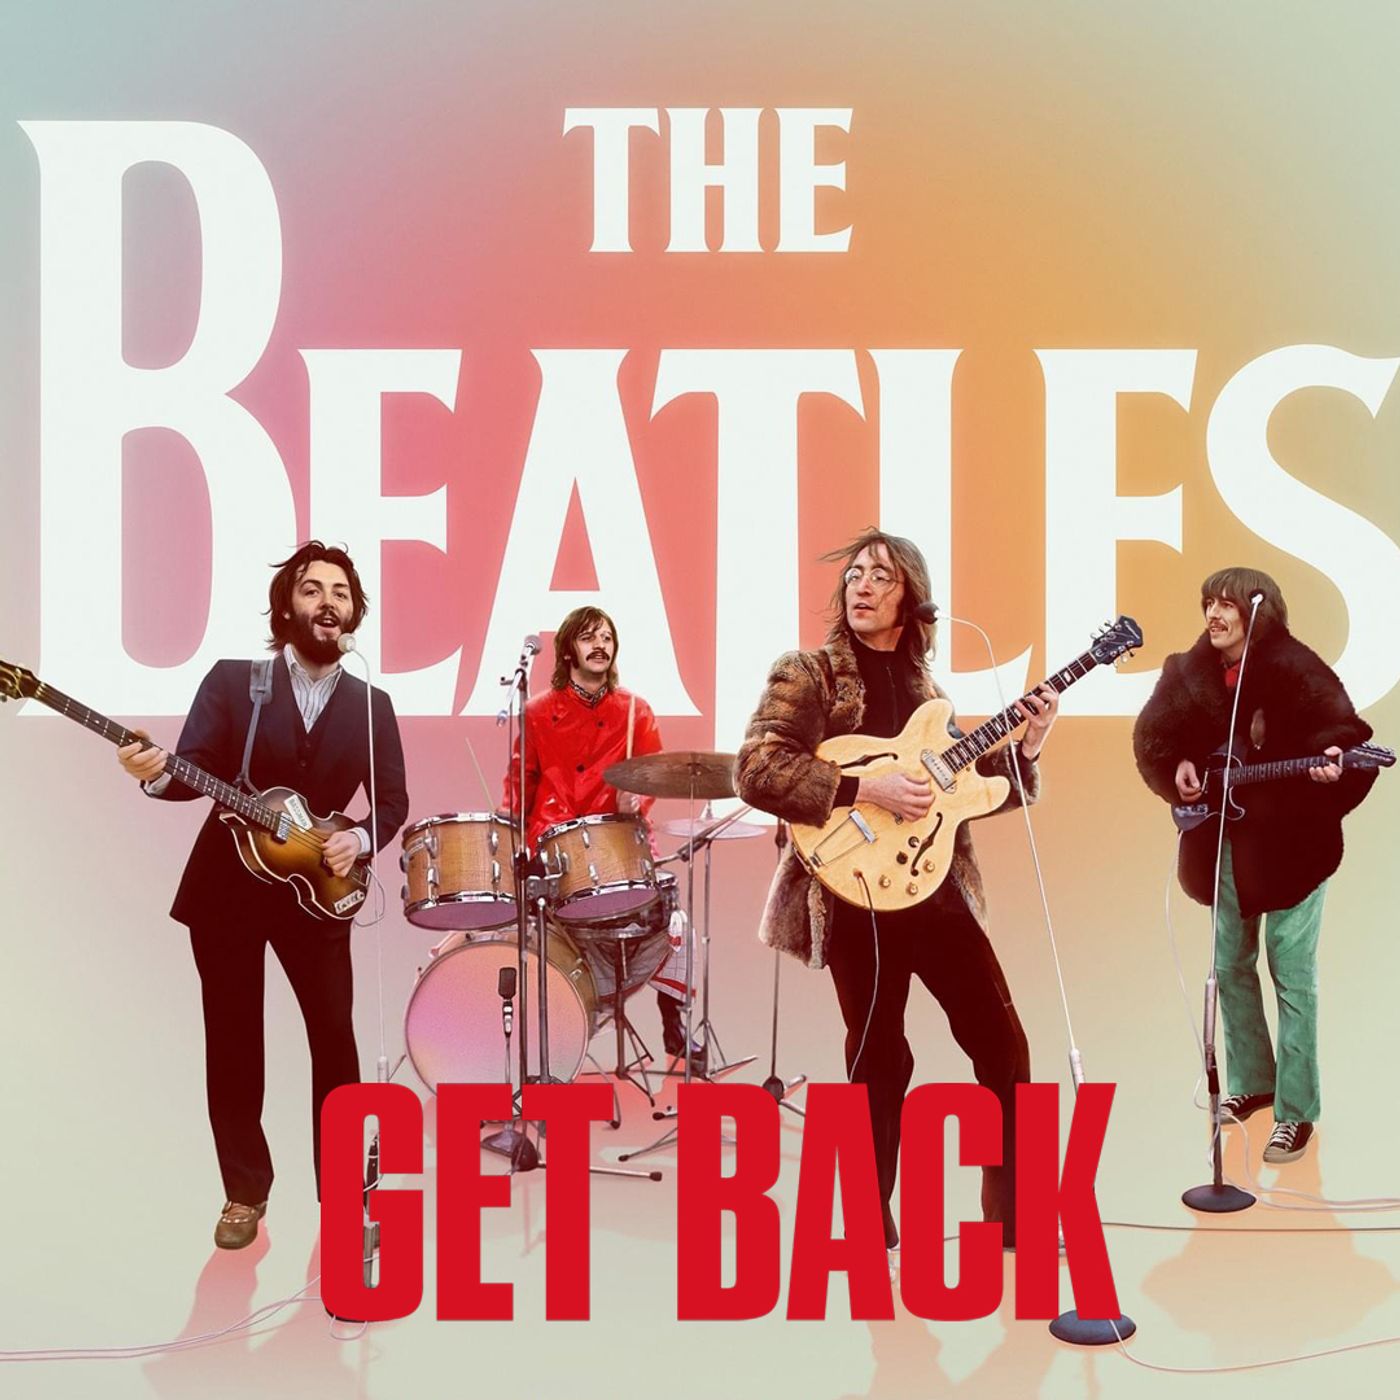 284: "The Beatles: Get Back"